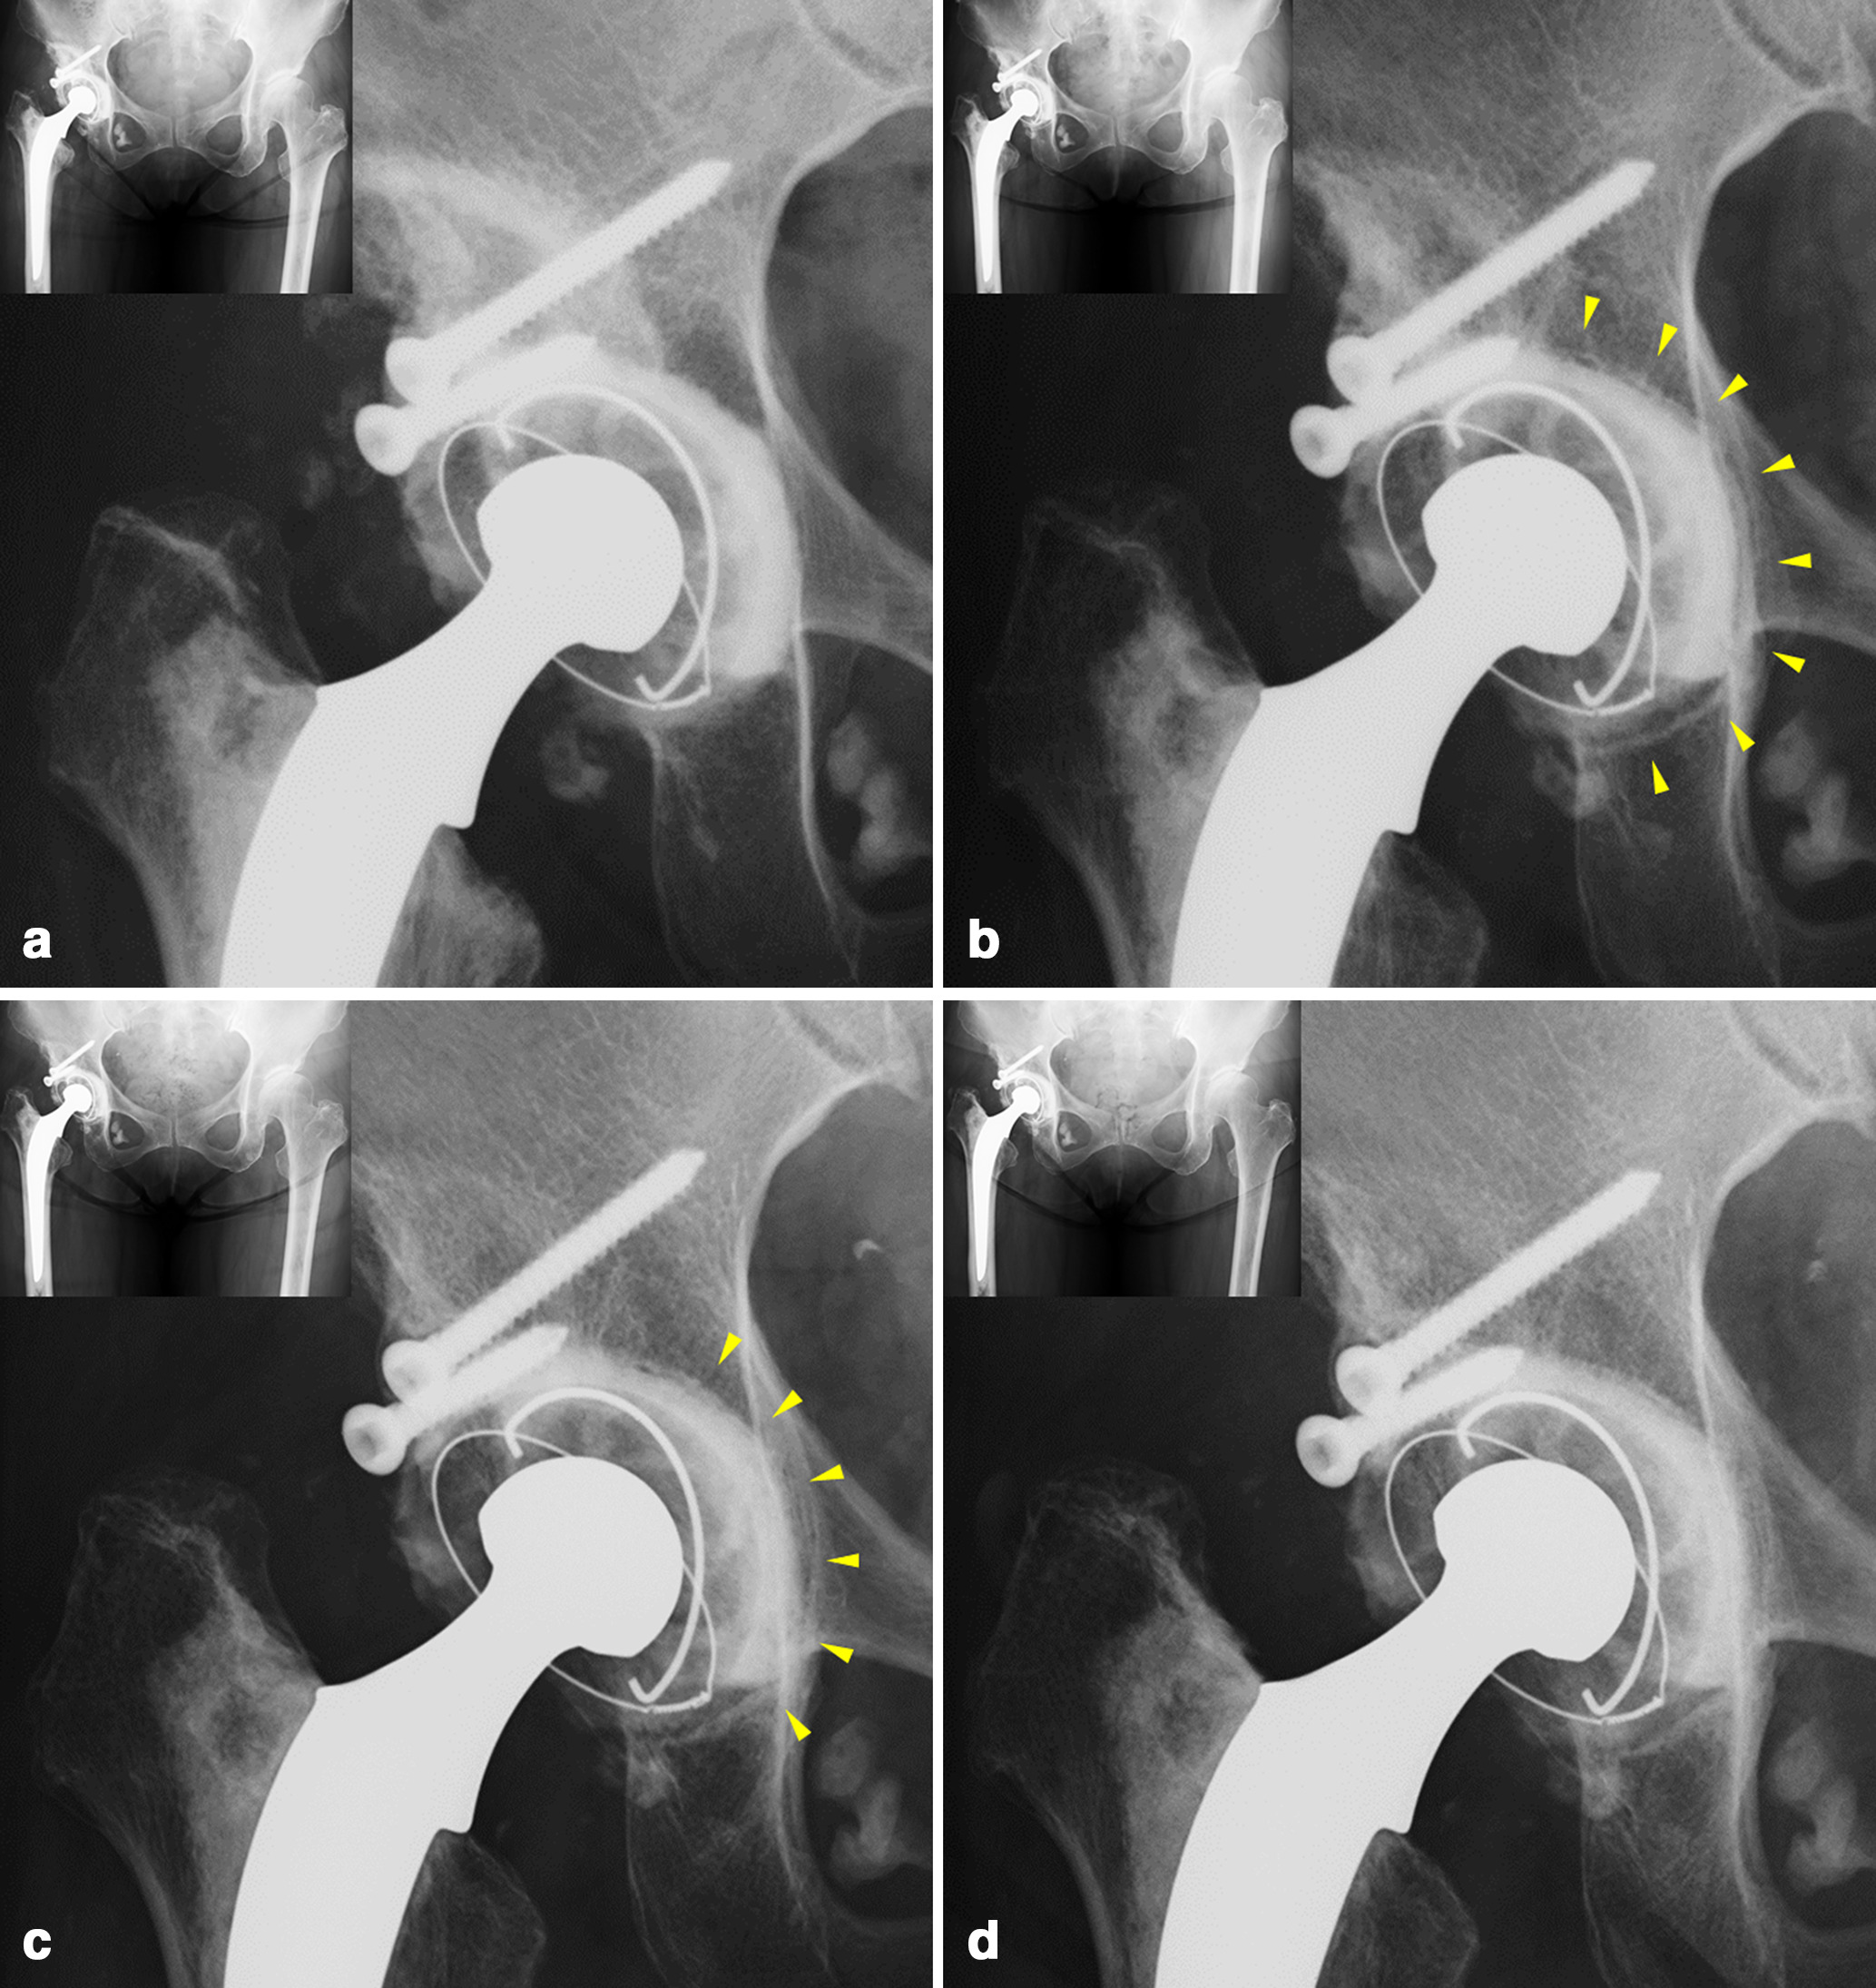 Fig. 5 
          Postoperative radiographs of a 61-year-old woman with primary cemented total hip arthroplasty. a) One week postoperatively; b) one year postoperatively, the yellow arrow indicates a radiolucent line at the cement-bone interface in DeLee Charnley zones 2 and 3; c) five years postoperatively, the yellow arrow indicates the improvement in the radiolucent line at the cement-bone interface in DeLee Charnley zone 2 and part of zone 3; and d) nine years postoperatively, improvement of the cement-bone interface was maintained.
        